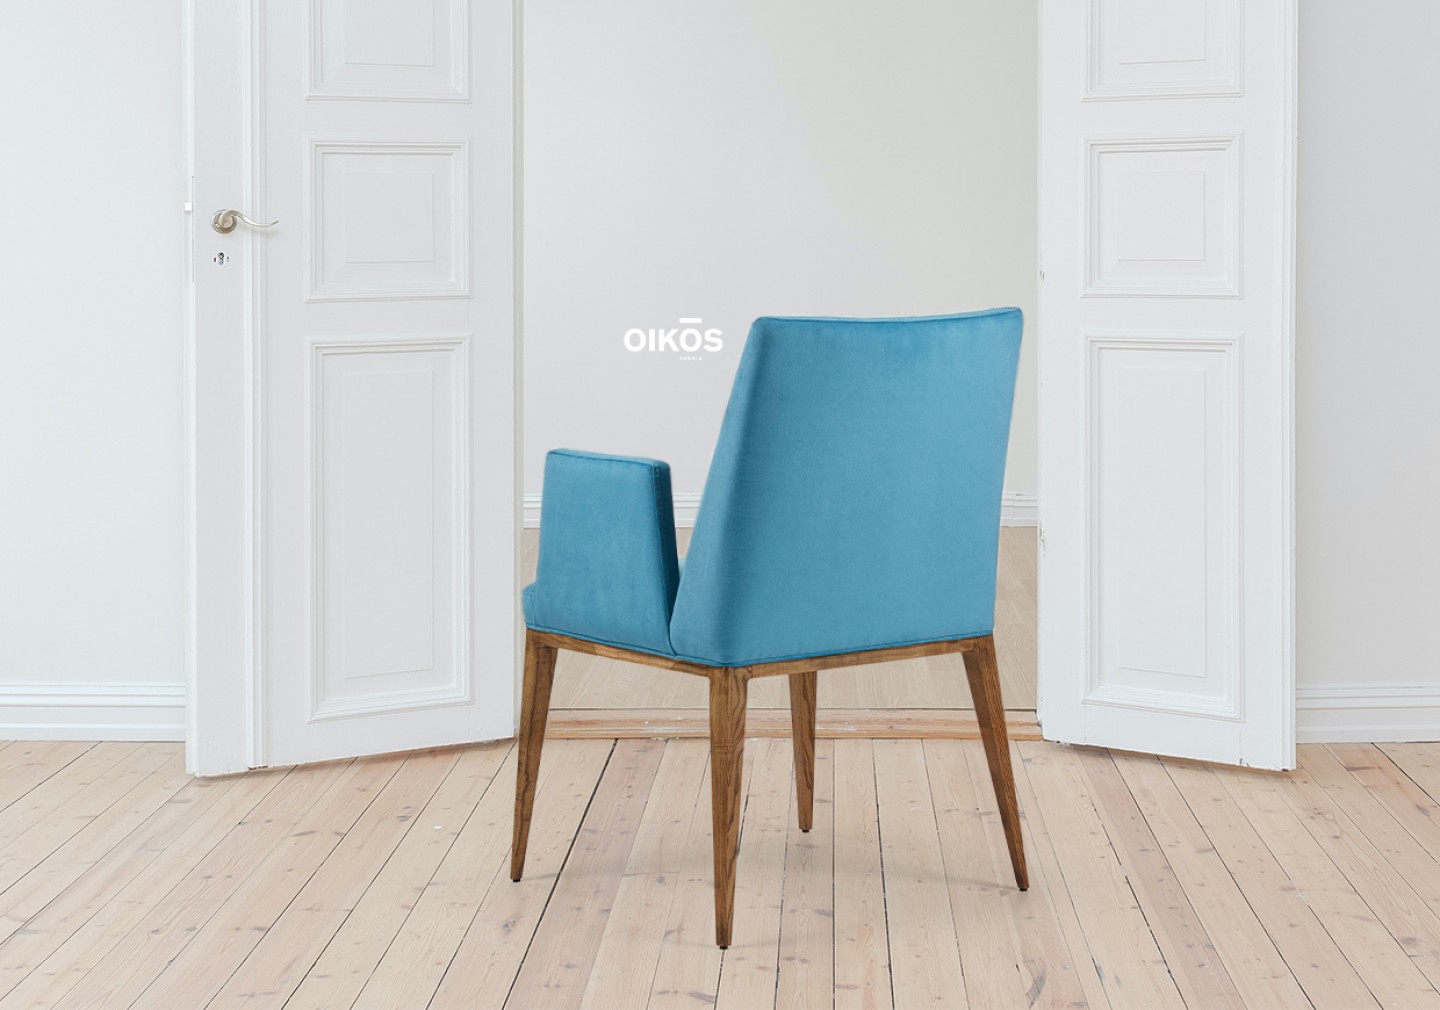 THE CHANTAL DINING CHAIR